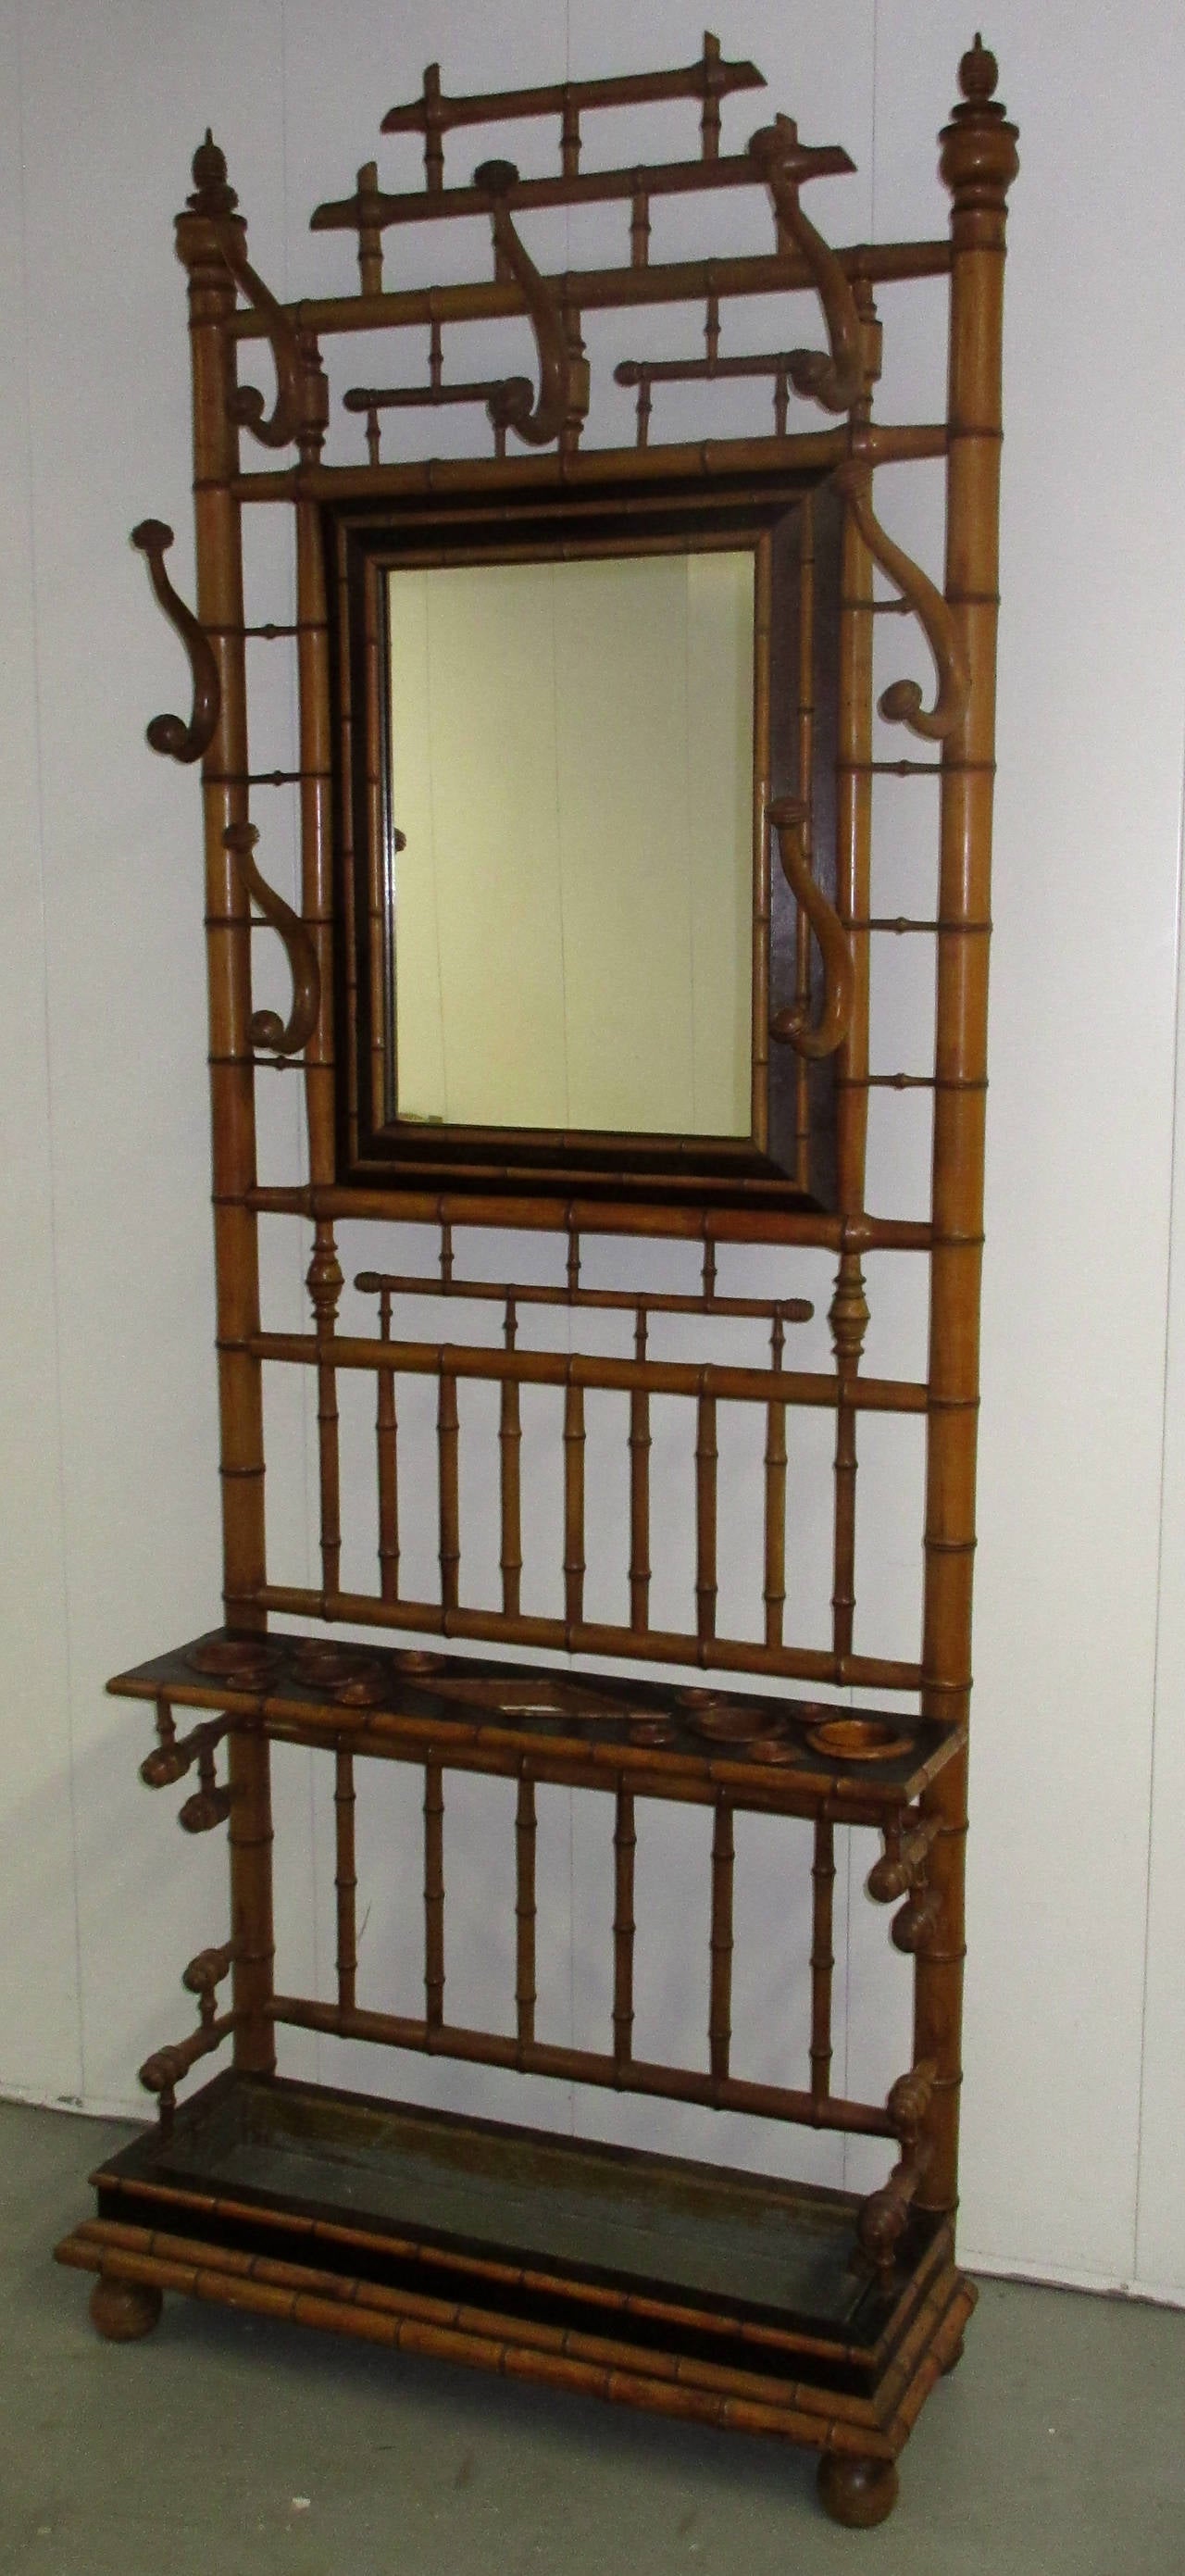 An early 20th century French bamboo hall Stand with framed mirror. The piece stands on call feet and is topped with turned finials. There are seven scrolled hangers and a slotted shelf with a tin insert below.